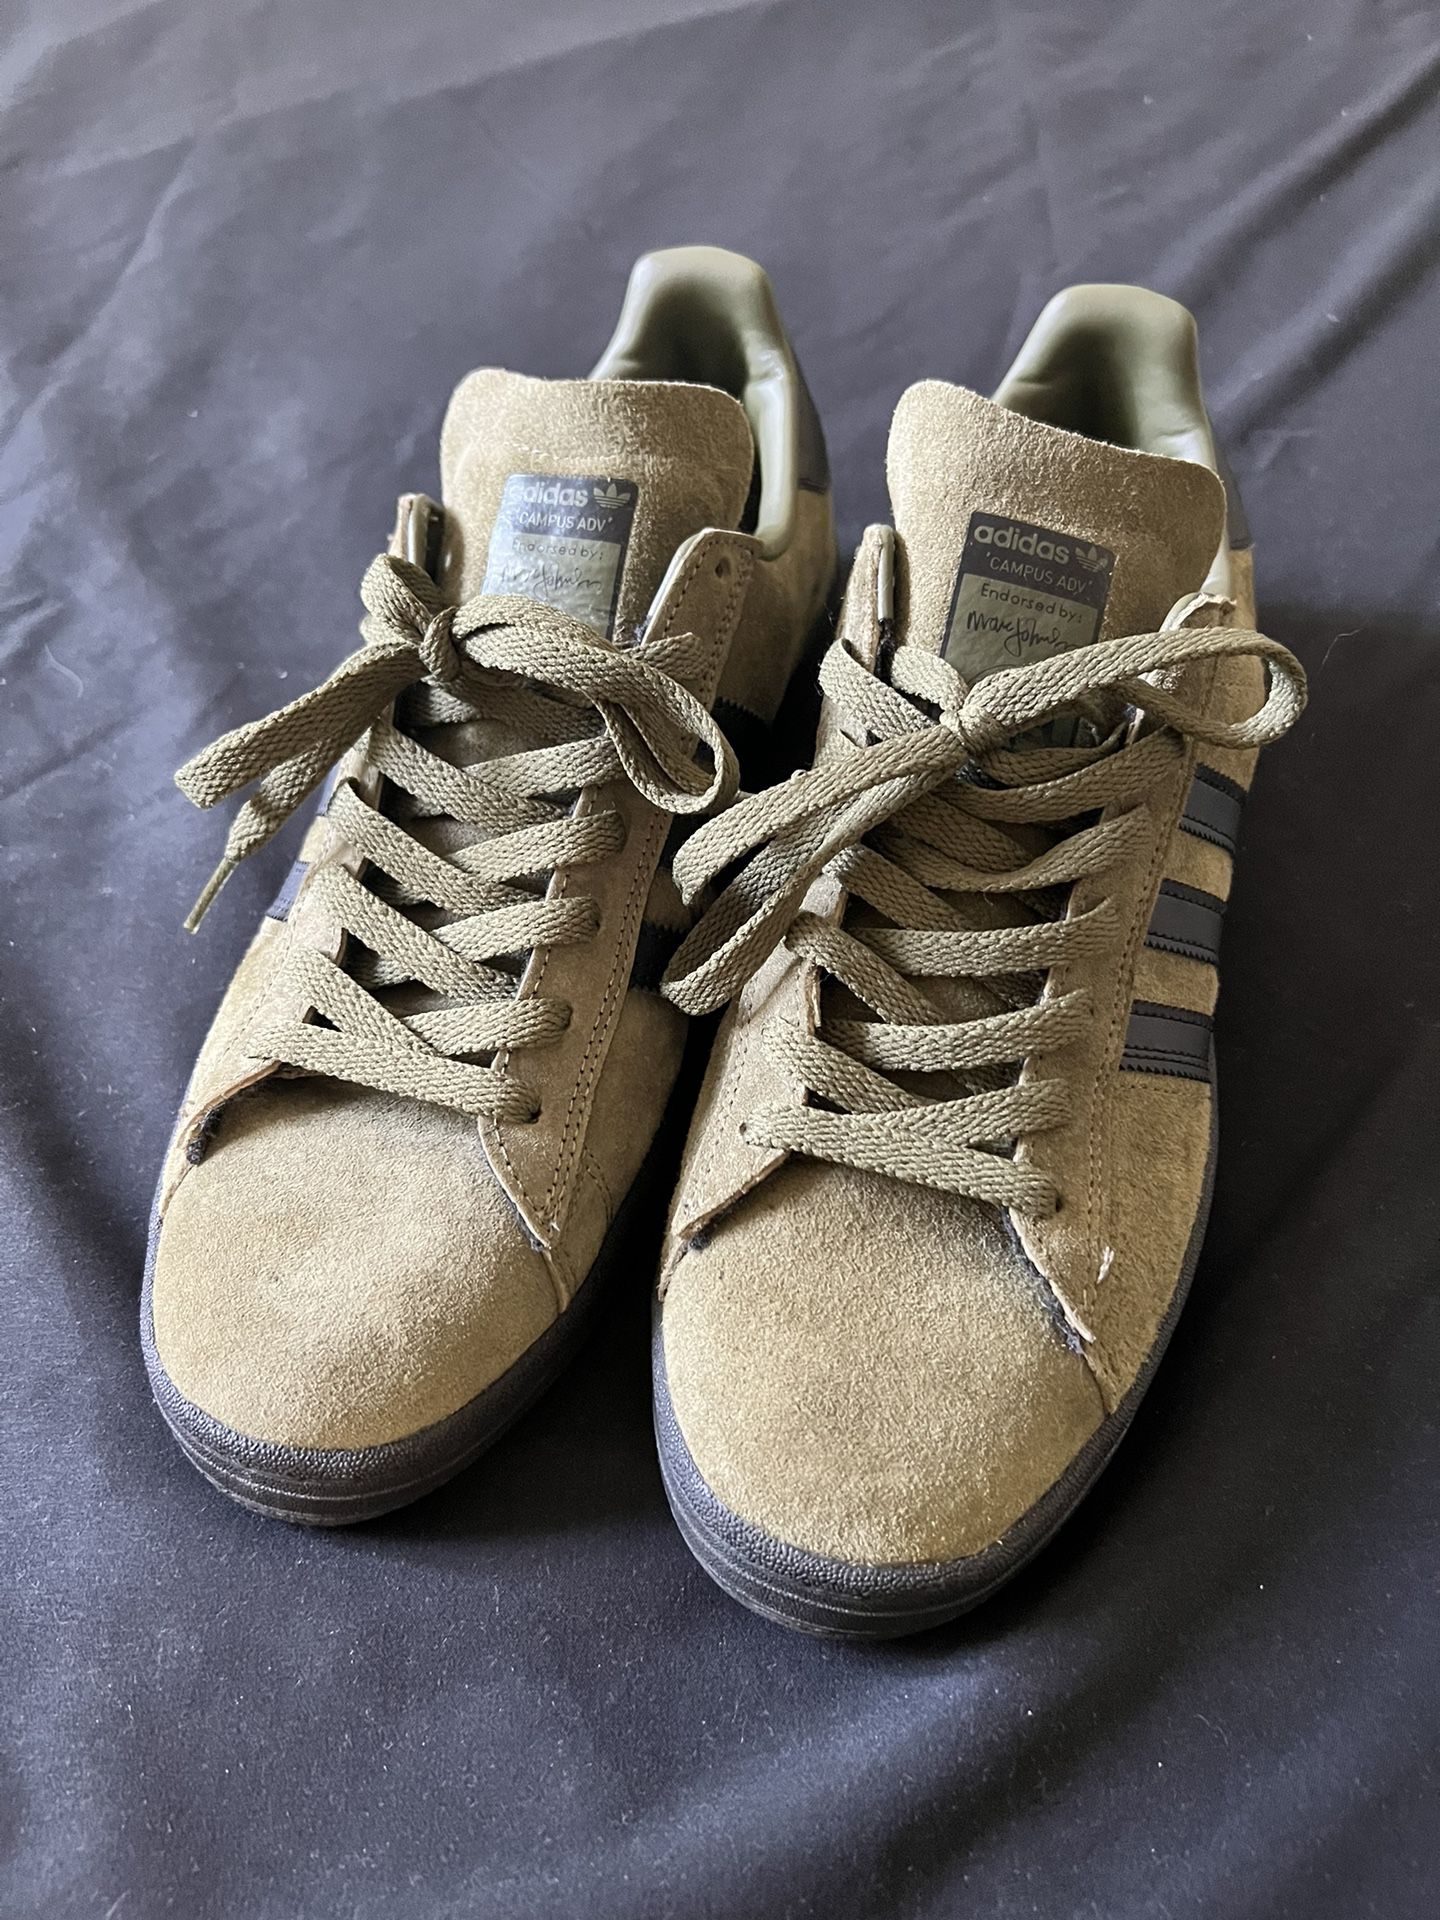 Adidas Marc Johnson ADV Campus Sz10 New Without Box Olive Green/Black for Sale in Grove, CA OfferUp